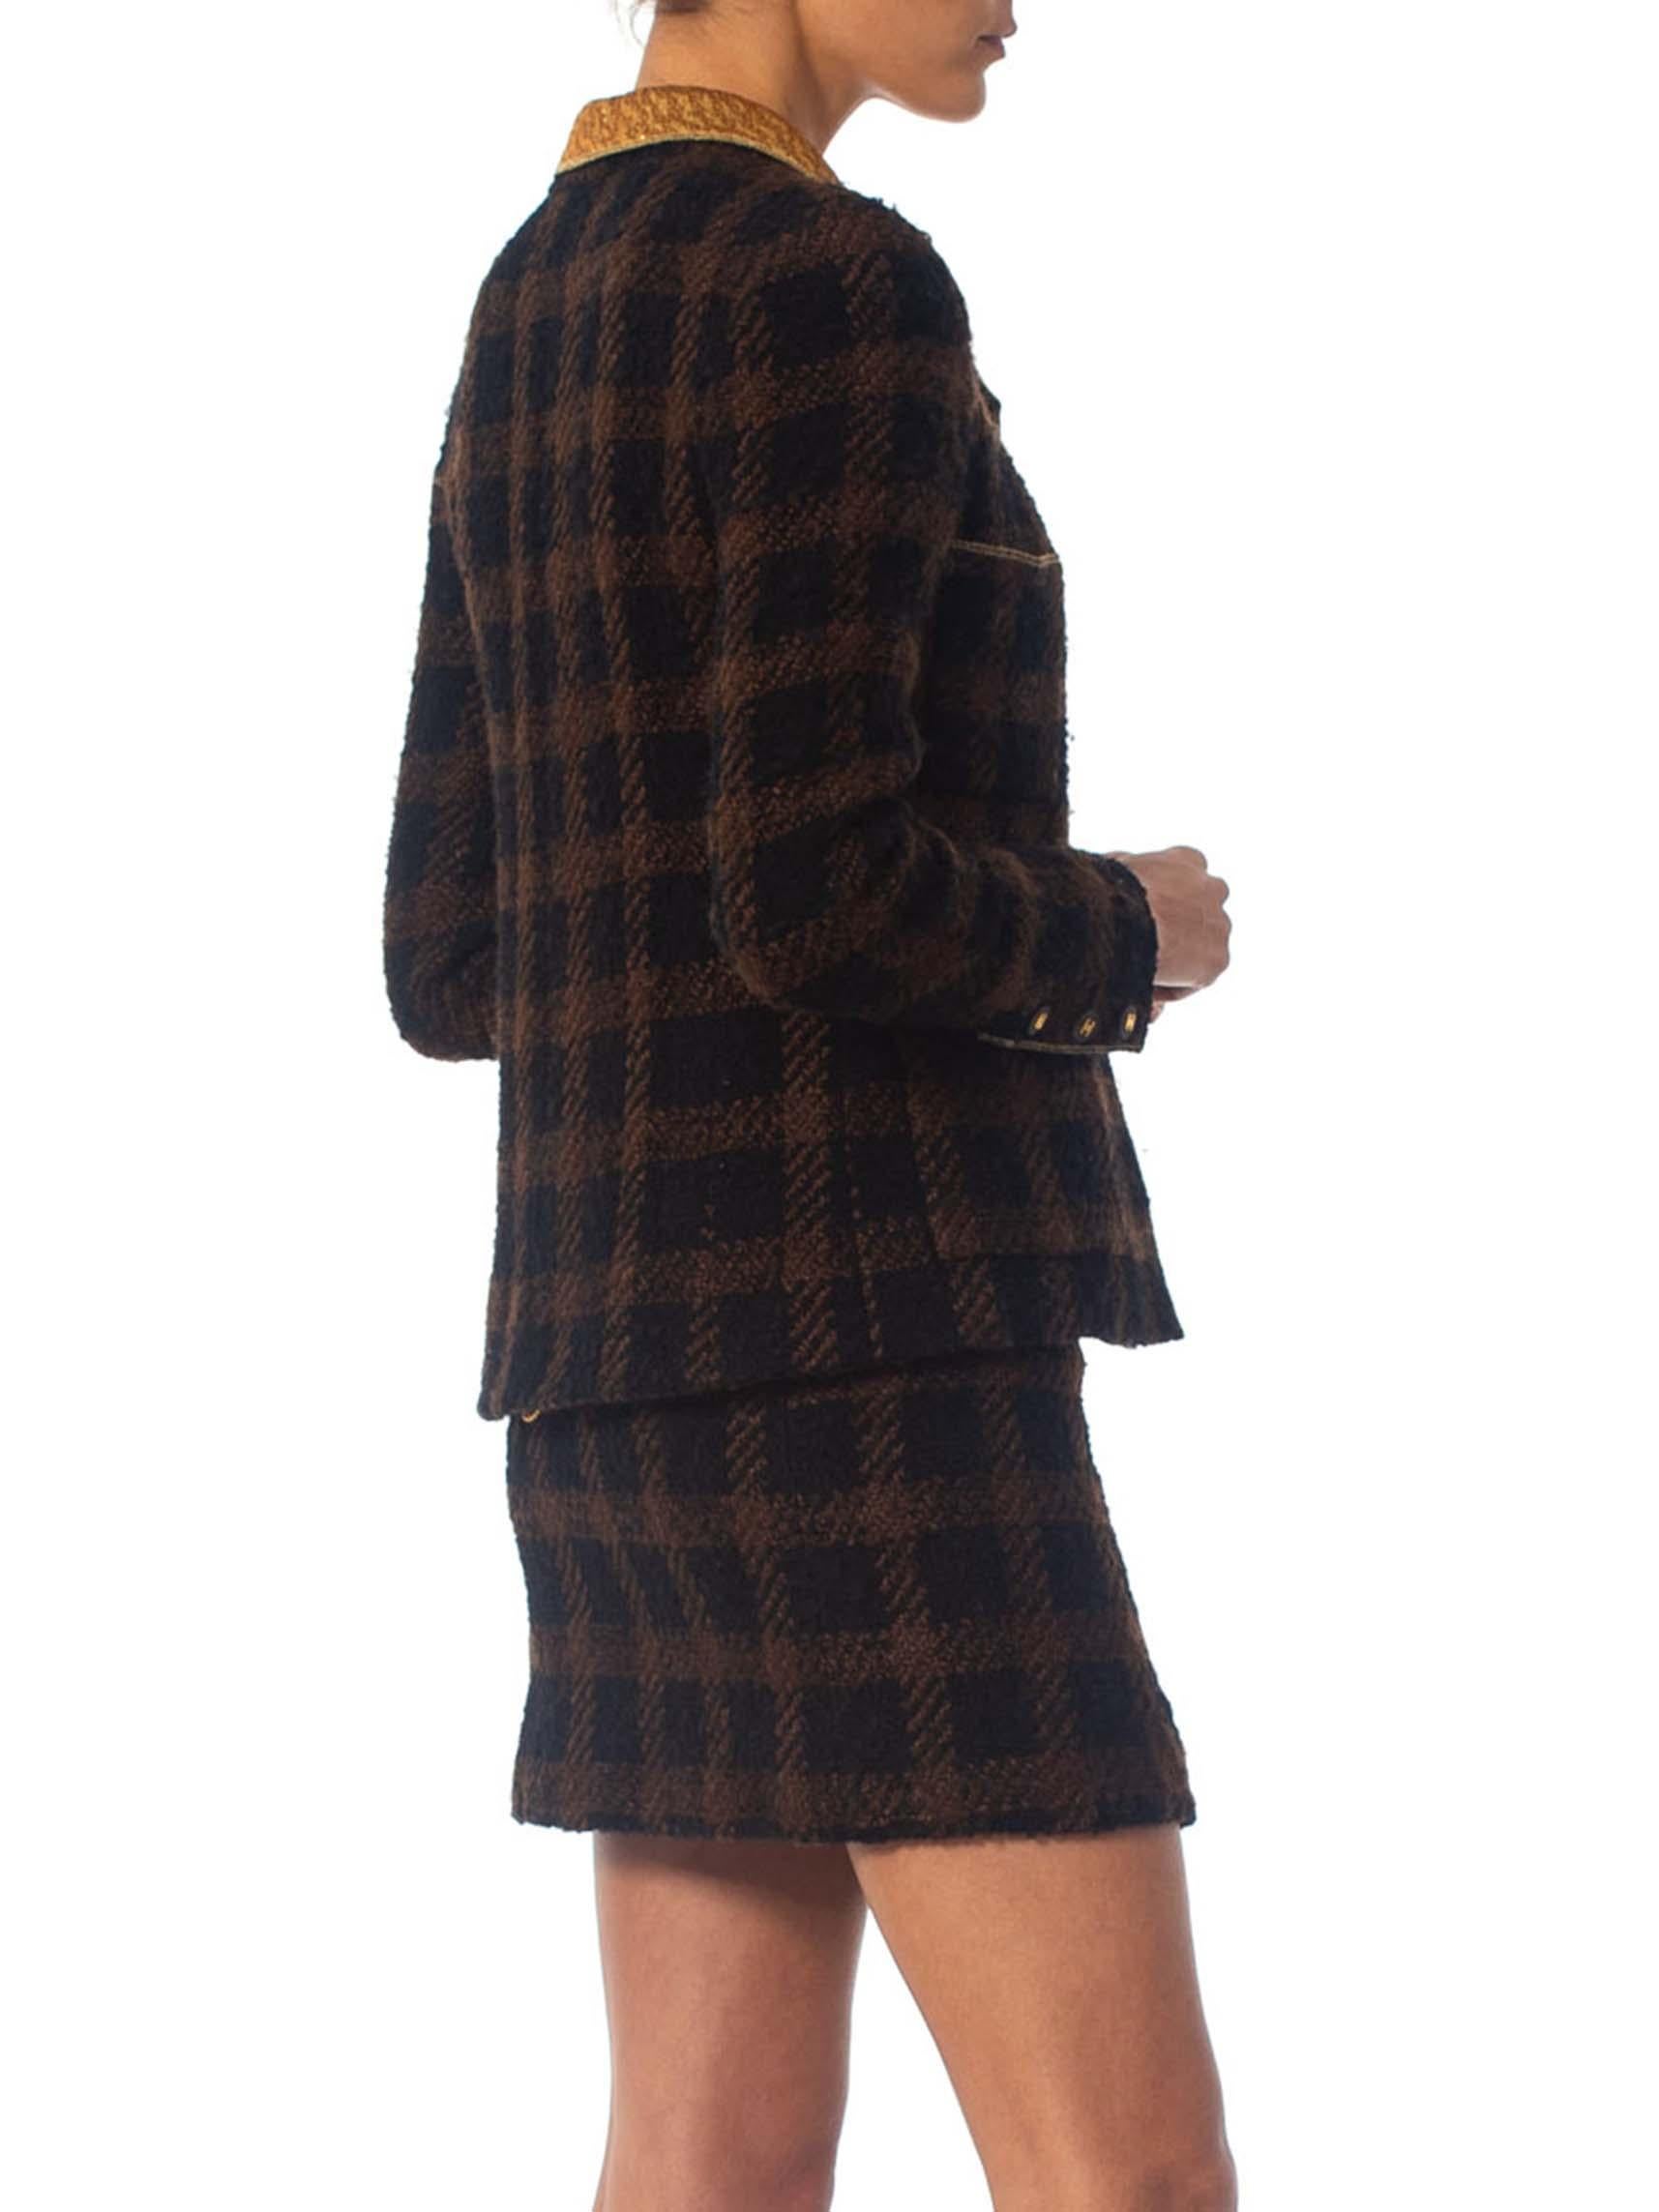 Women's 1990S CHANEL Black & Brown With  Gold Lamé Wool Mini Skirt Suit Lined In Silk For Sale